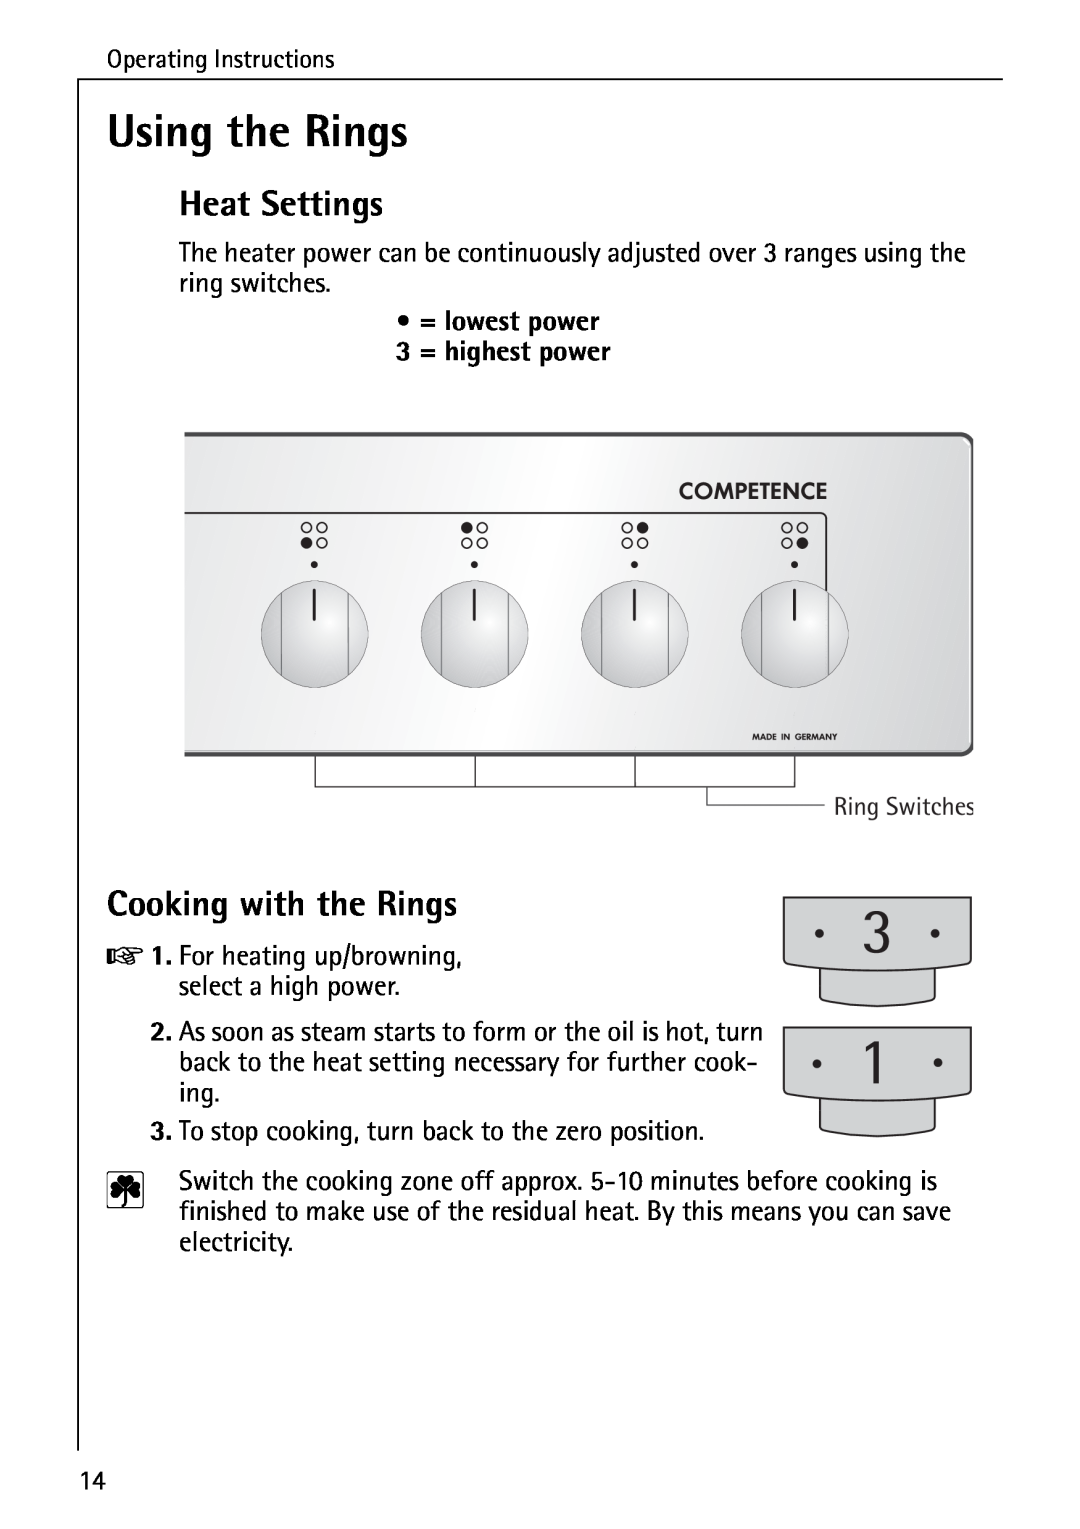 AEG 2003 F operating instructions Using the Rings, Heat Settings, Cooking with the Rings, = lowest power 3 = highest power 